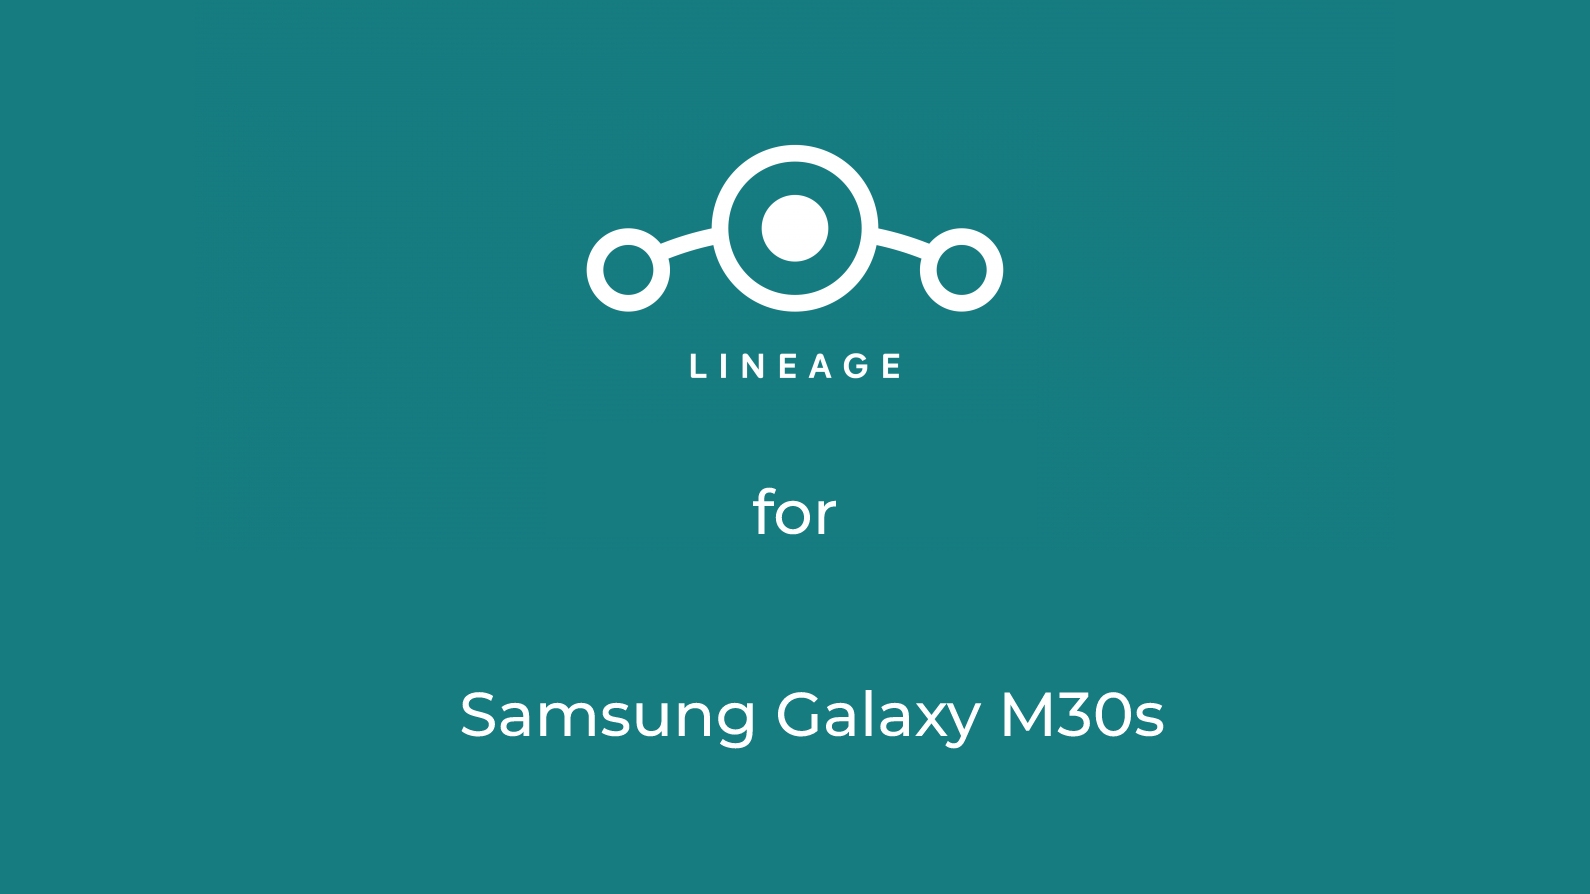 Download LineageOS 18.1 for Samsung Galaxy M30s